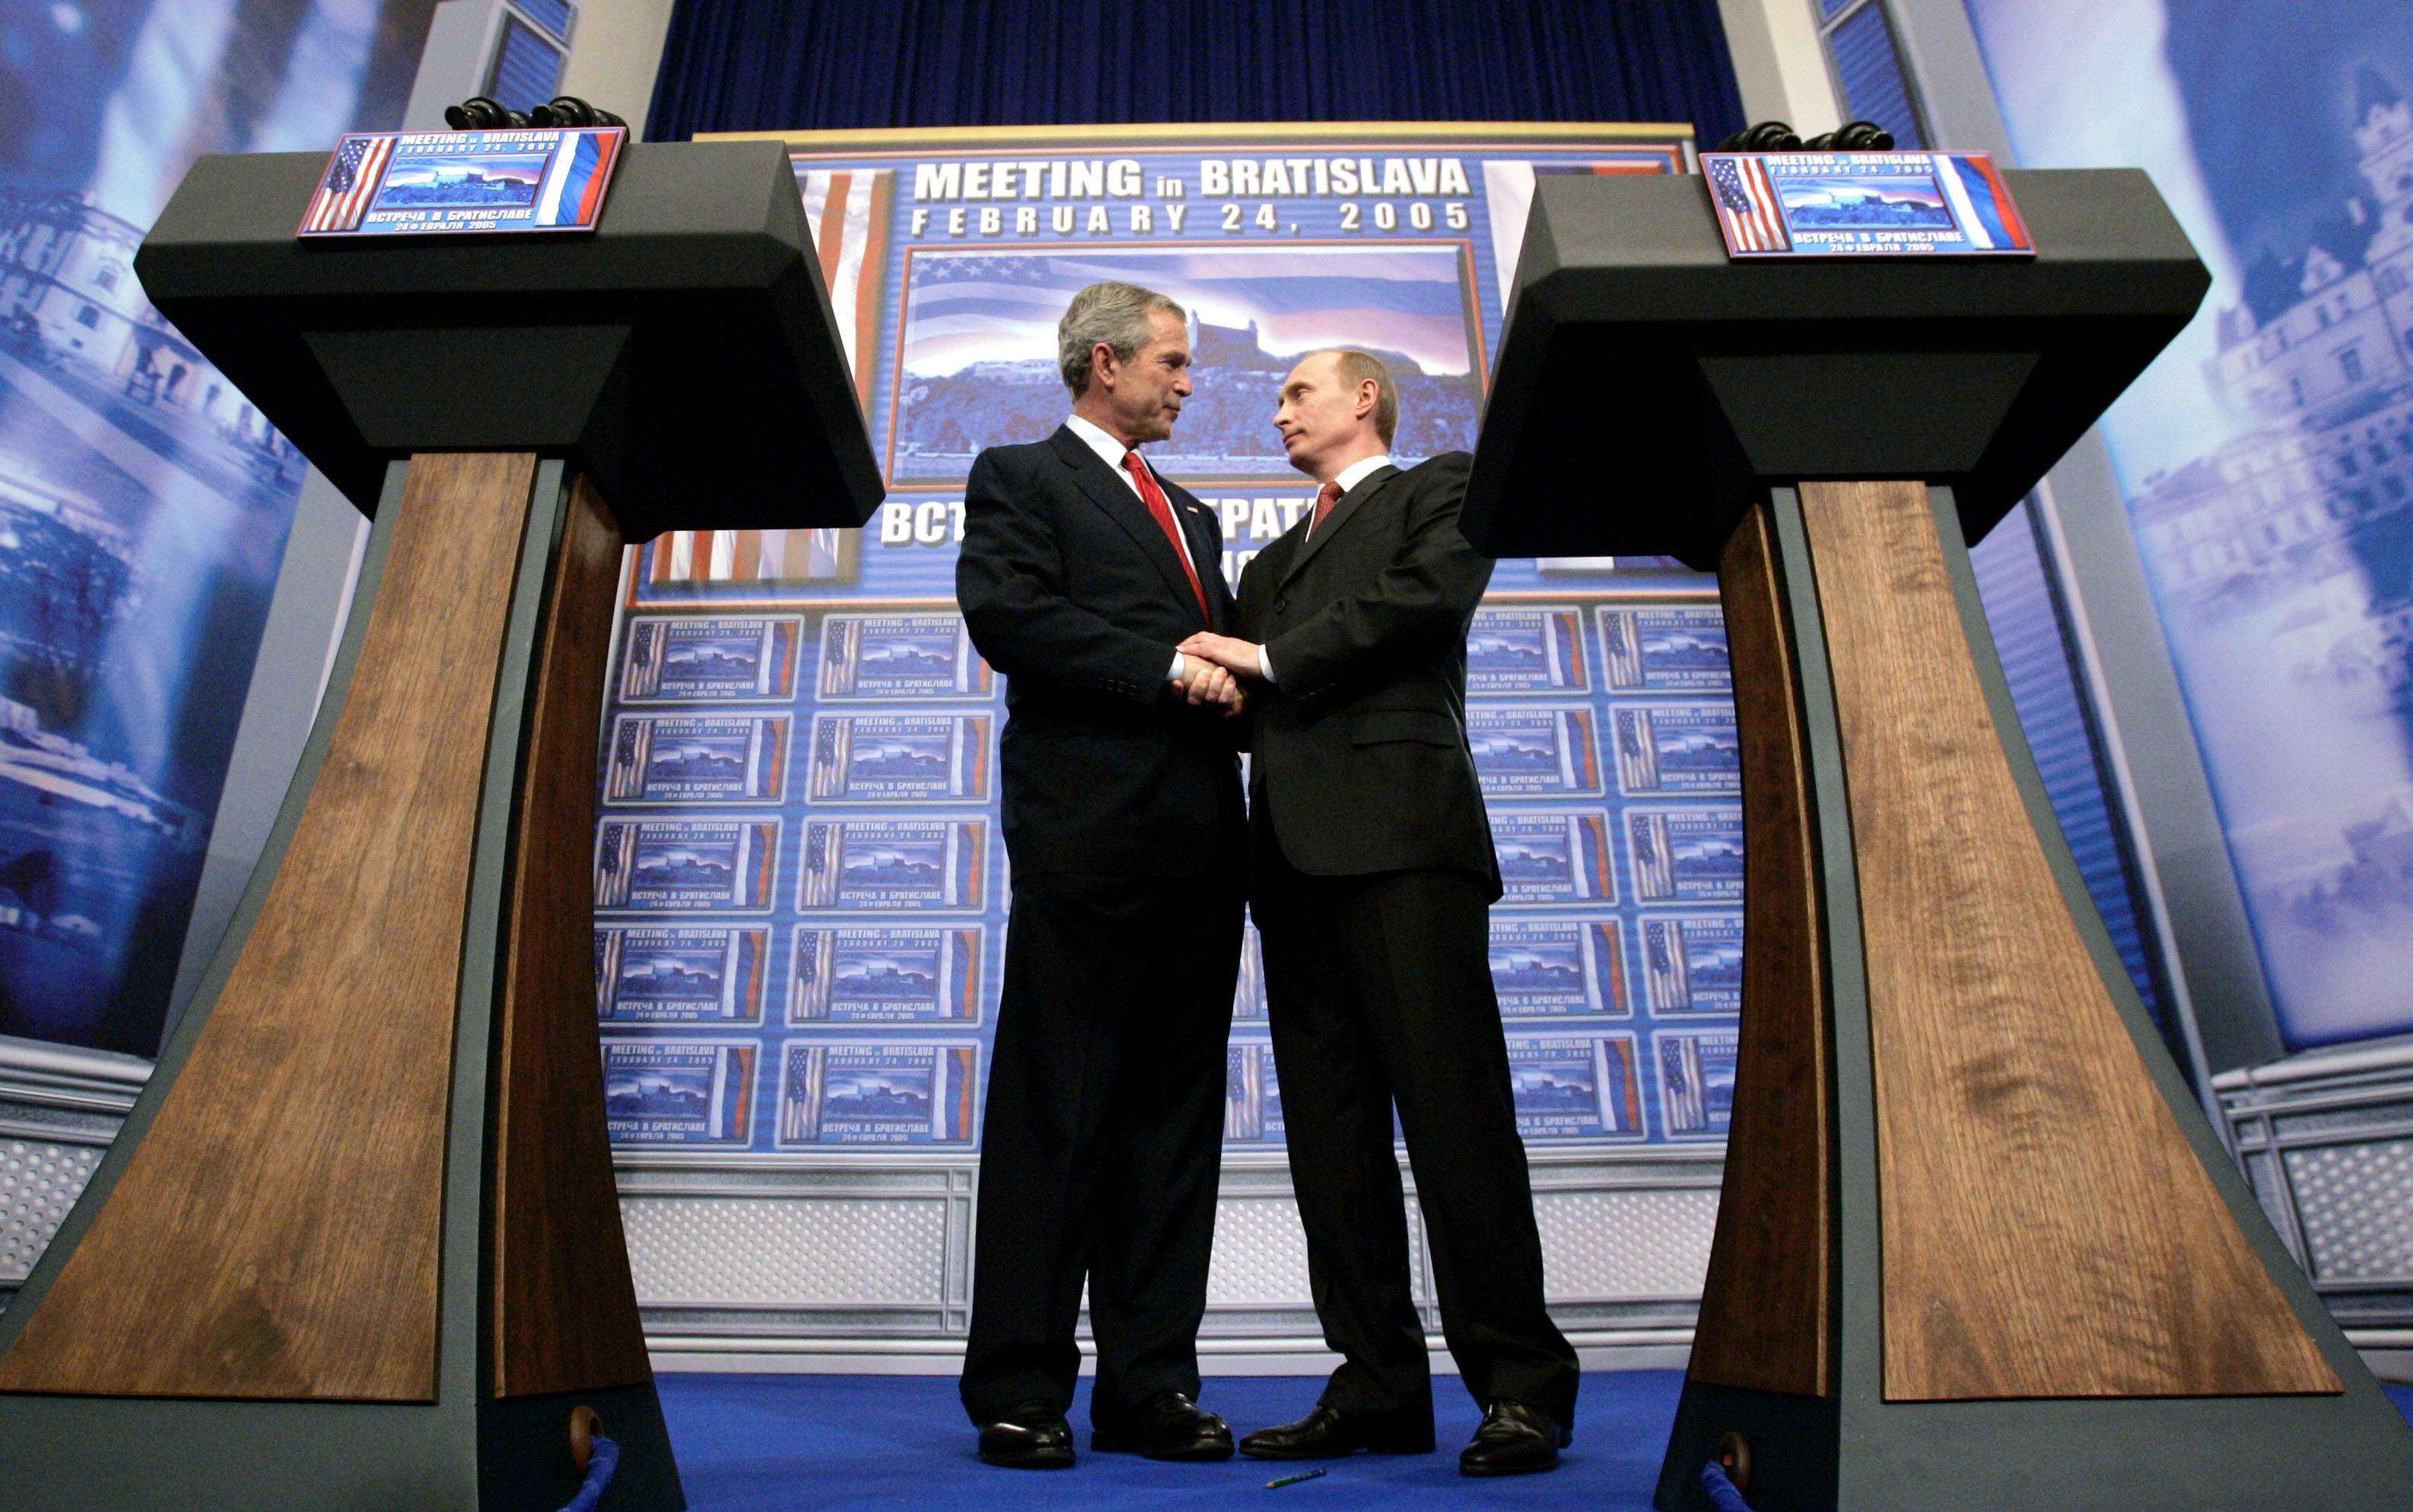 Then US president George W. Bush and Russian President Vladimir Putin clasp hands after conducting a joint press conference at Bratislava Castle in Slovakia, on February 24, 2005. While US-Russia tries have deteriorated in recent years, Putin was the first international leader to call Bush after the September 11 attacks. Photo: Reuters